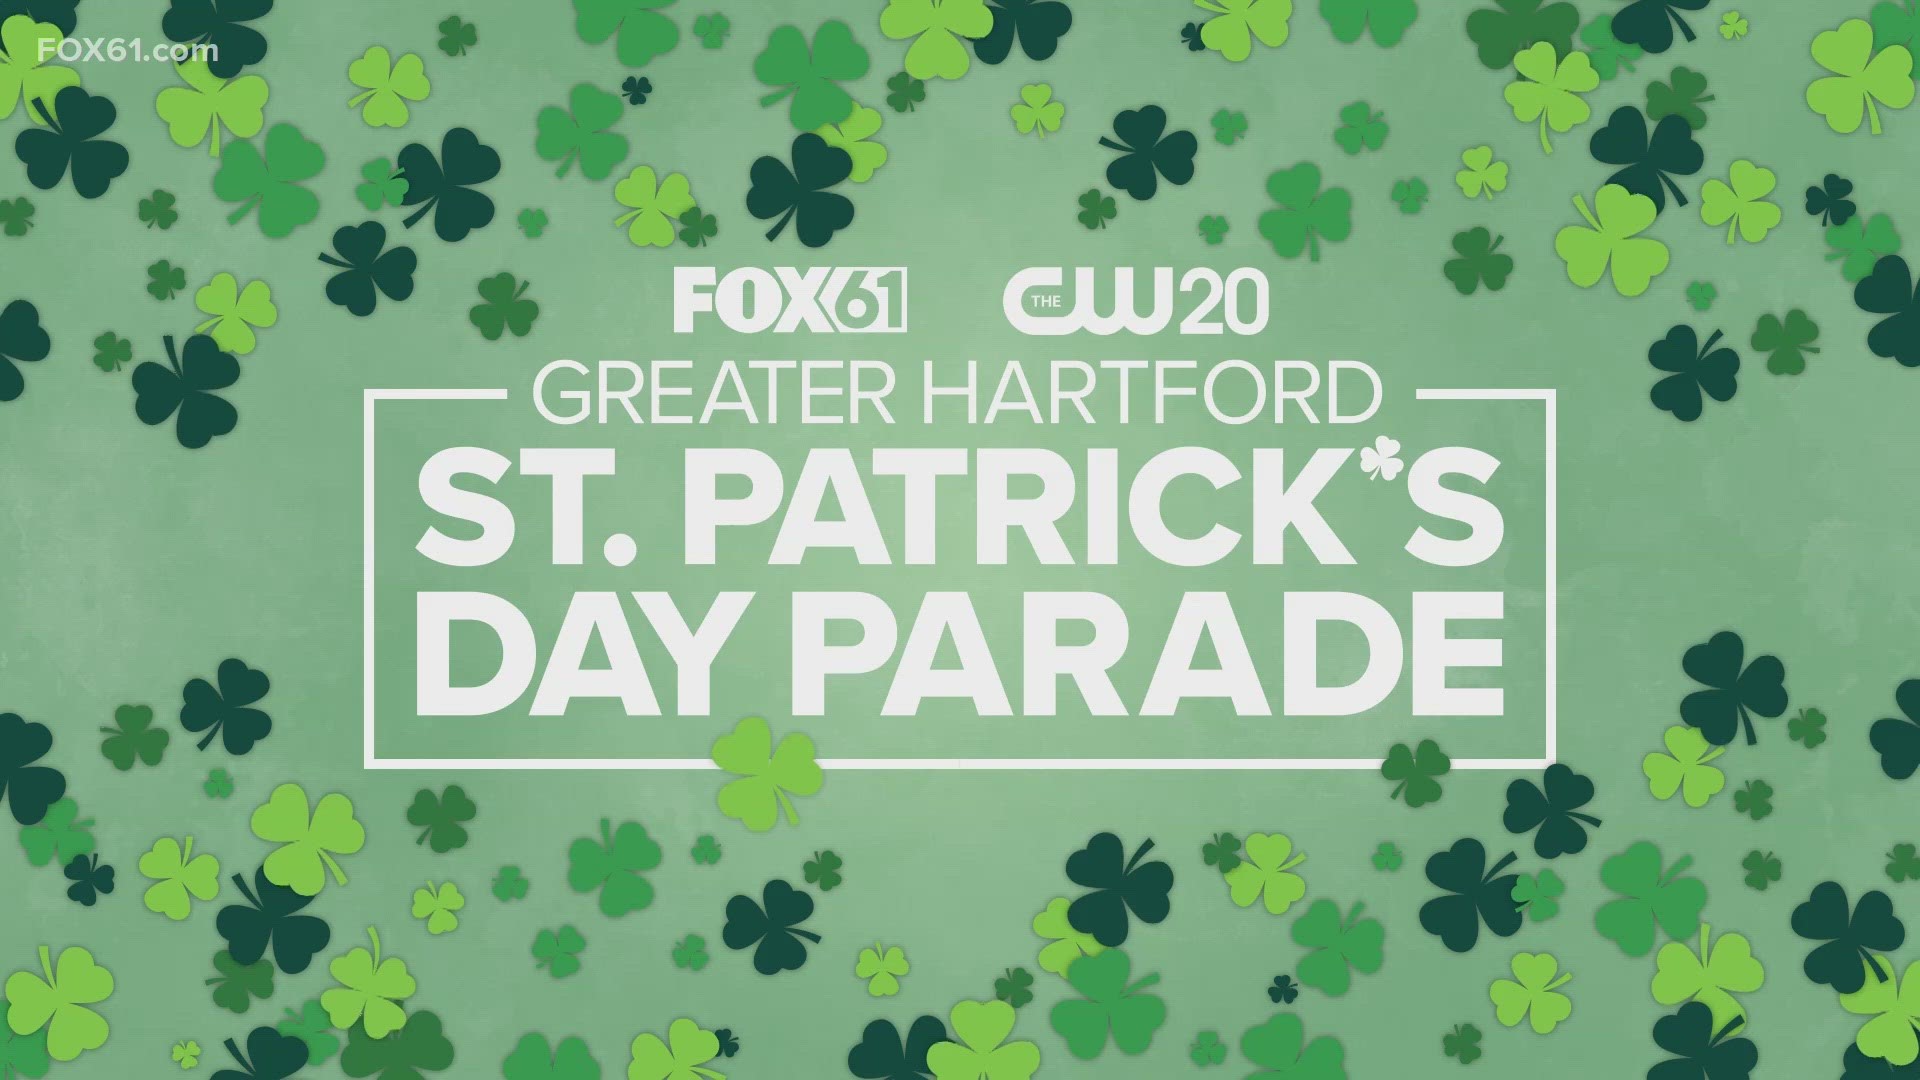 The Greater Hartford St. Patrick’s Day Parade returned with a bang on Saturday morning and the worrying clouds of possible rain or snow were nowhere in sight.